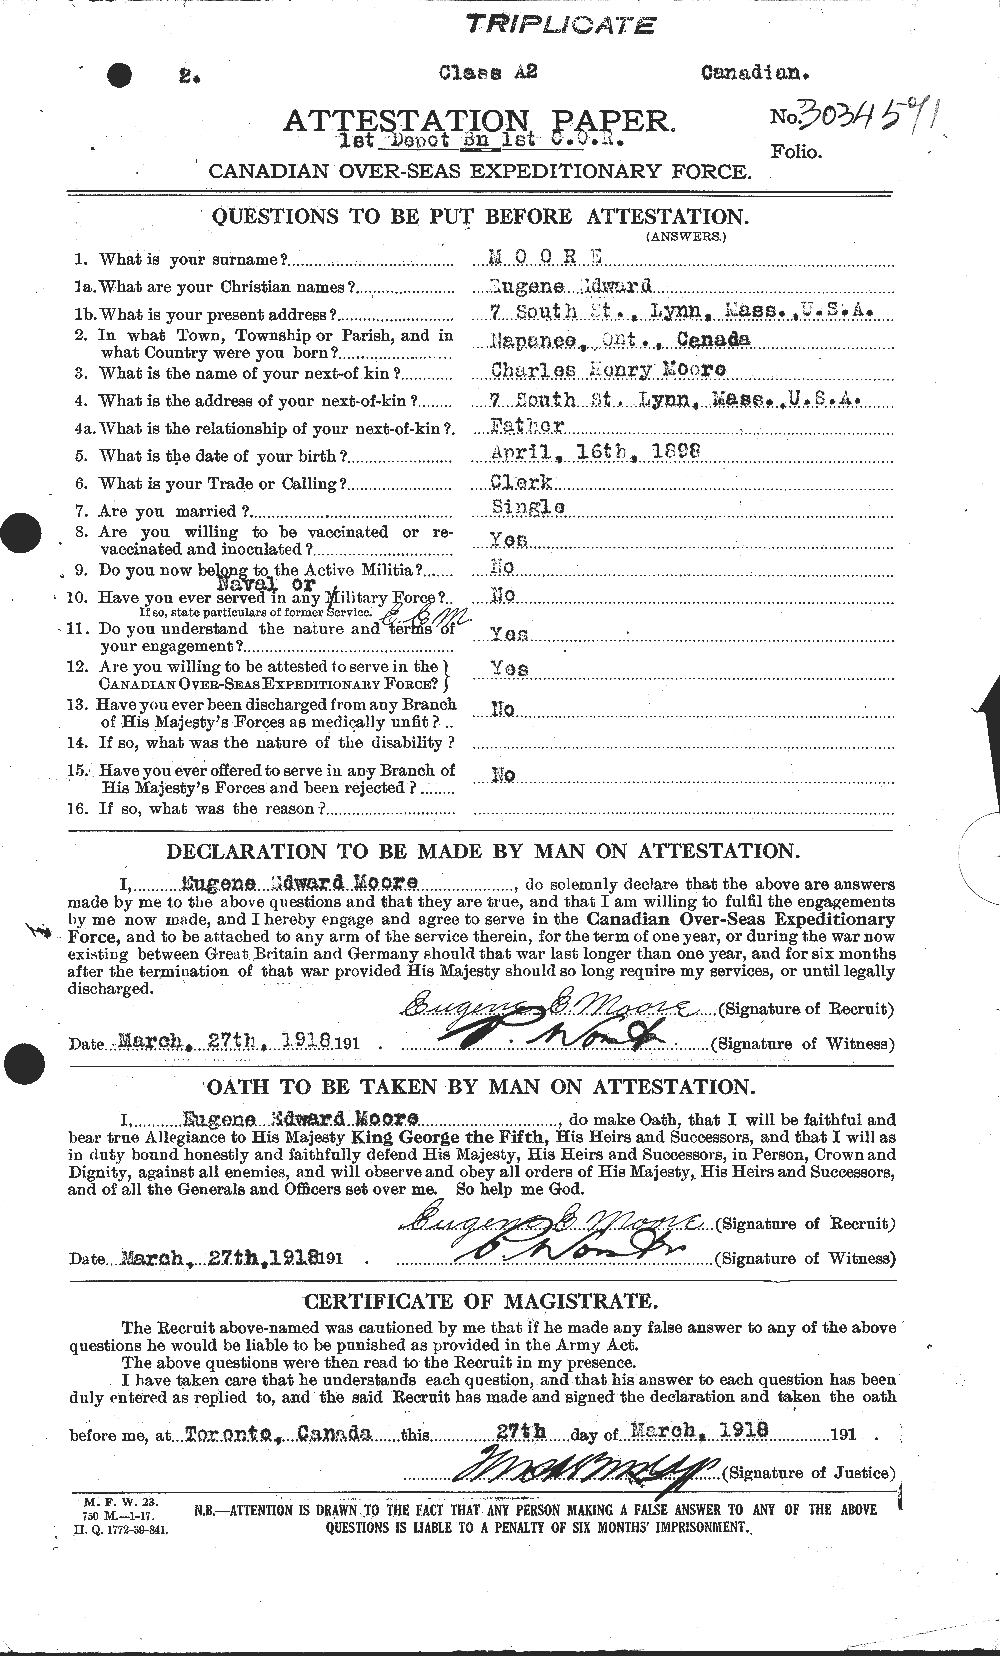 Personnel Records of the First World War - CEF 506674a